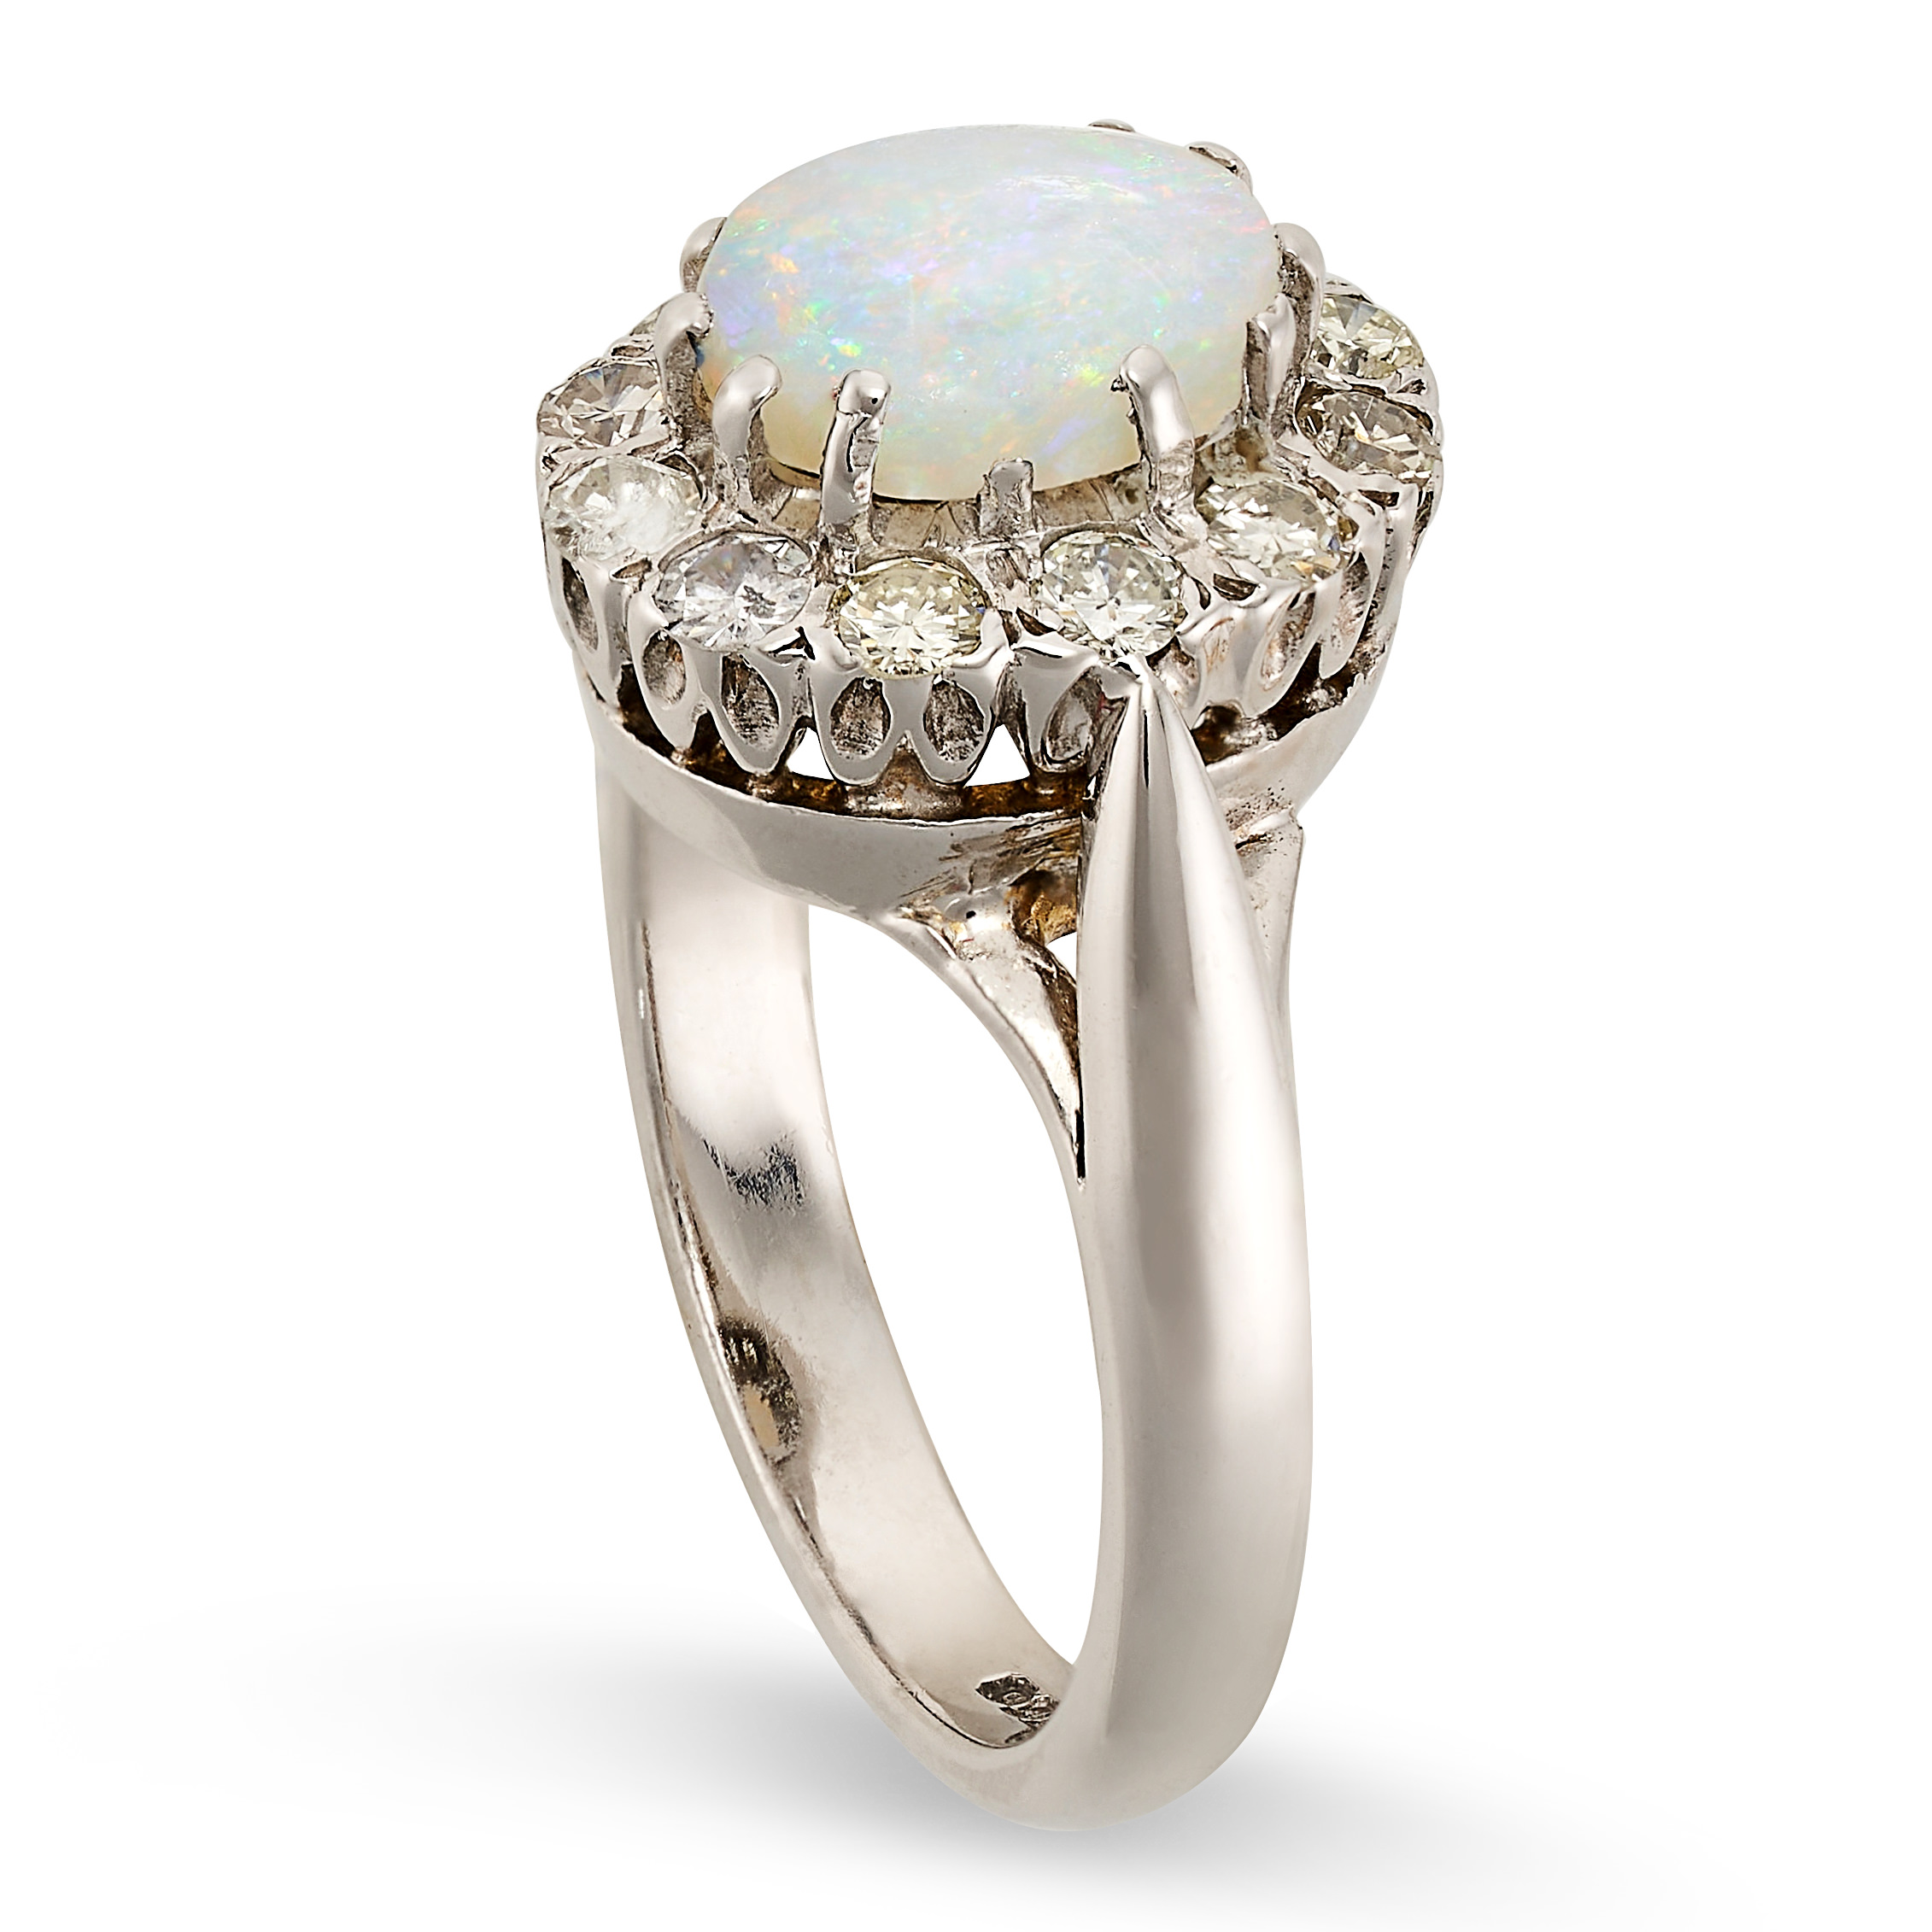 AN OPAL AND DIAMOND CLUSTER RING in 18ct white gold, set with a cabochon opal in a cluster of - Image 2 of 2